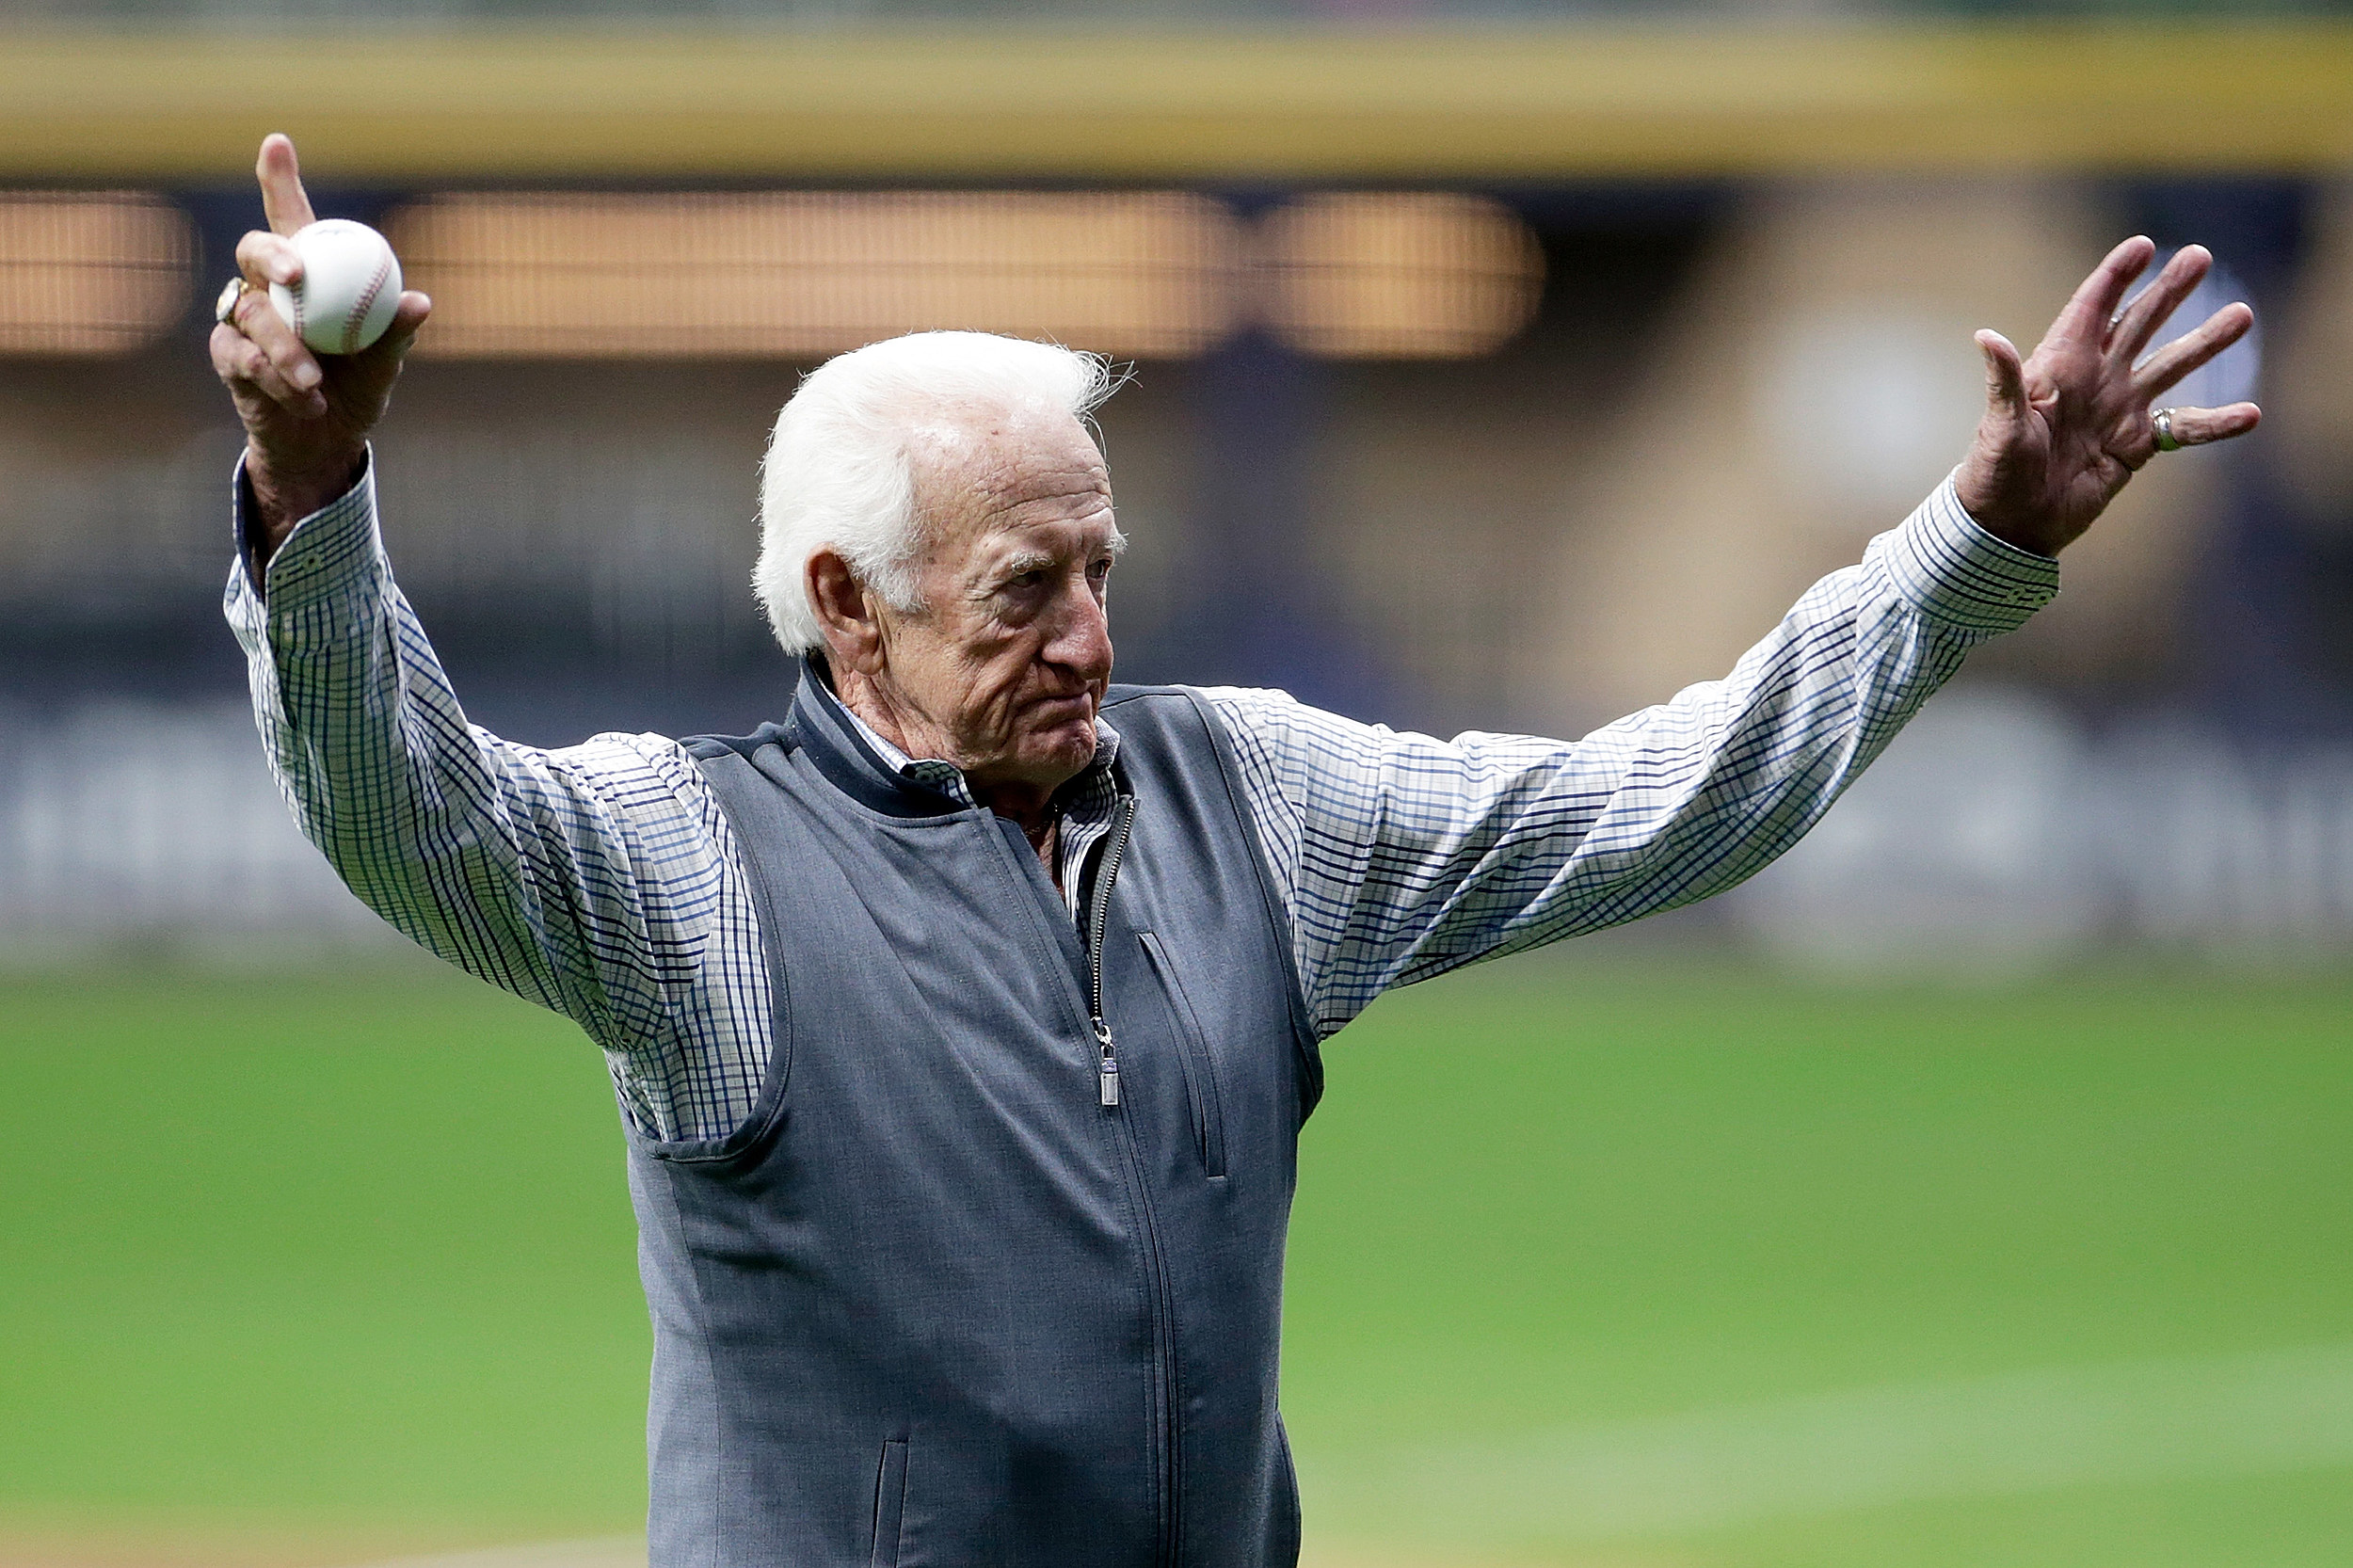 Brewers announcer Bob Uecker honored for 50 years behind mic [VIDEO]